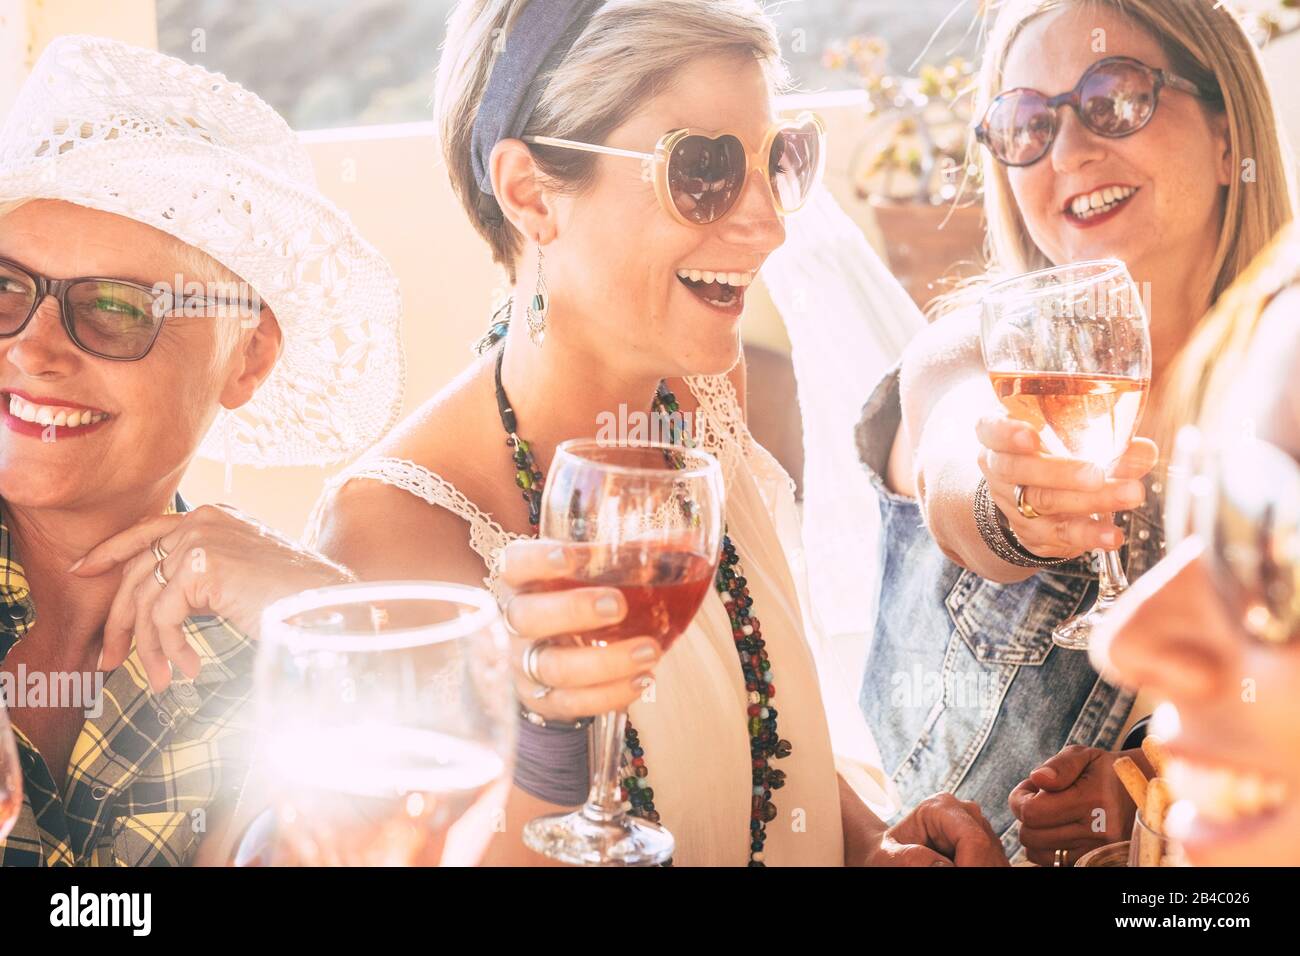 Closeup of happy beautiful cheerful people women celebrating together with red wine - bright sunny image joyful and friendship - young senior ladies smiling and laughing having fun at party Stock Photo